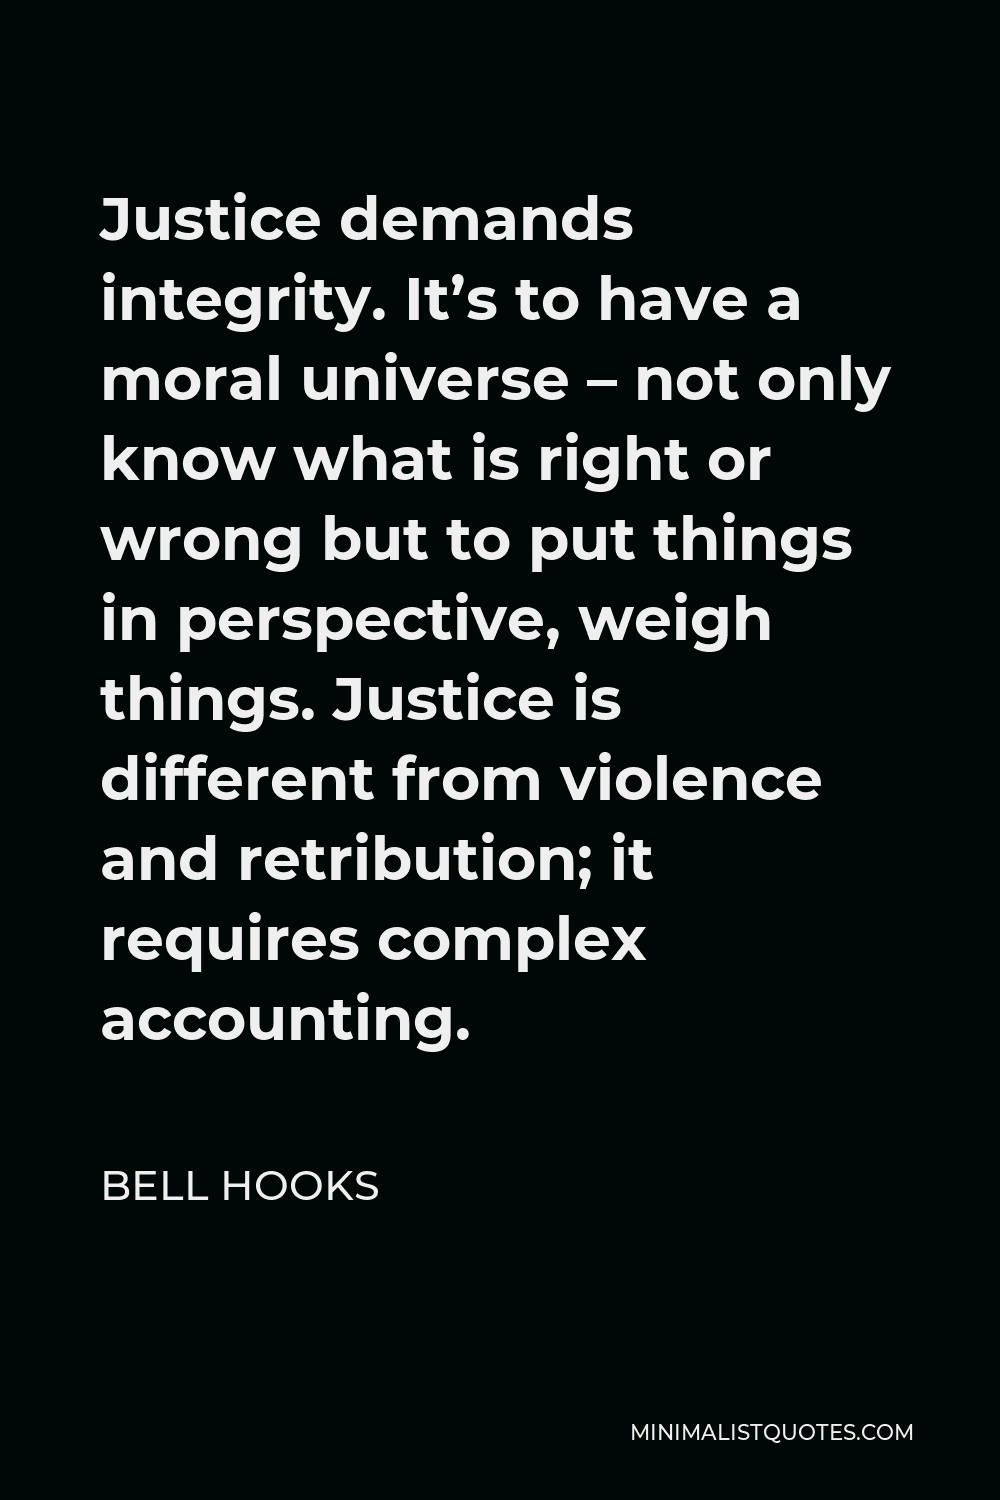 Bell Hooks Quote - Justice demands integrity. It’s to have a moral universe – not only know what is right or wrong but to put things in perspective, weigh things. Justice is different from violence and retribution; it requires complex accounting.